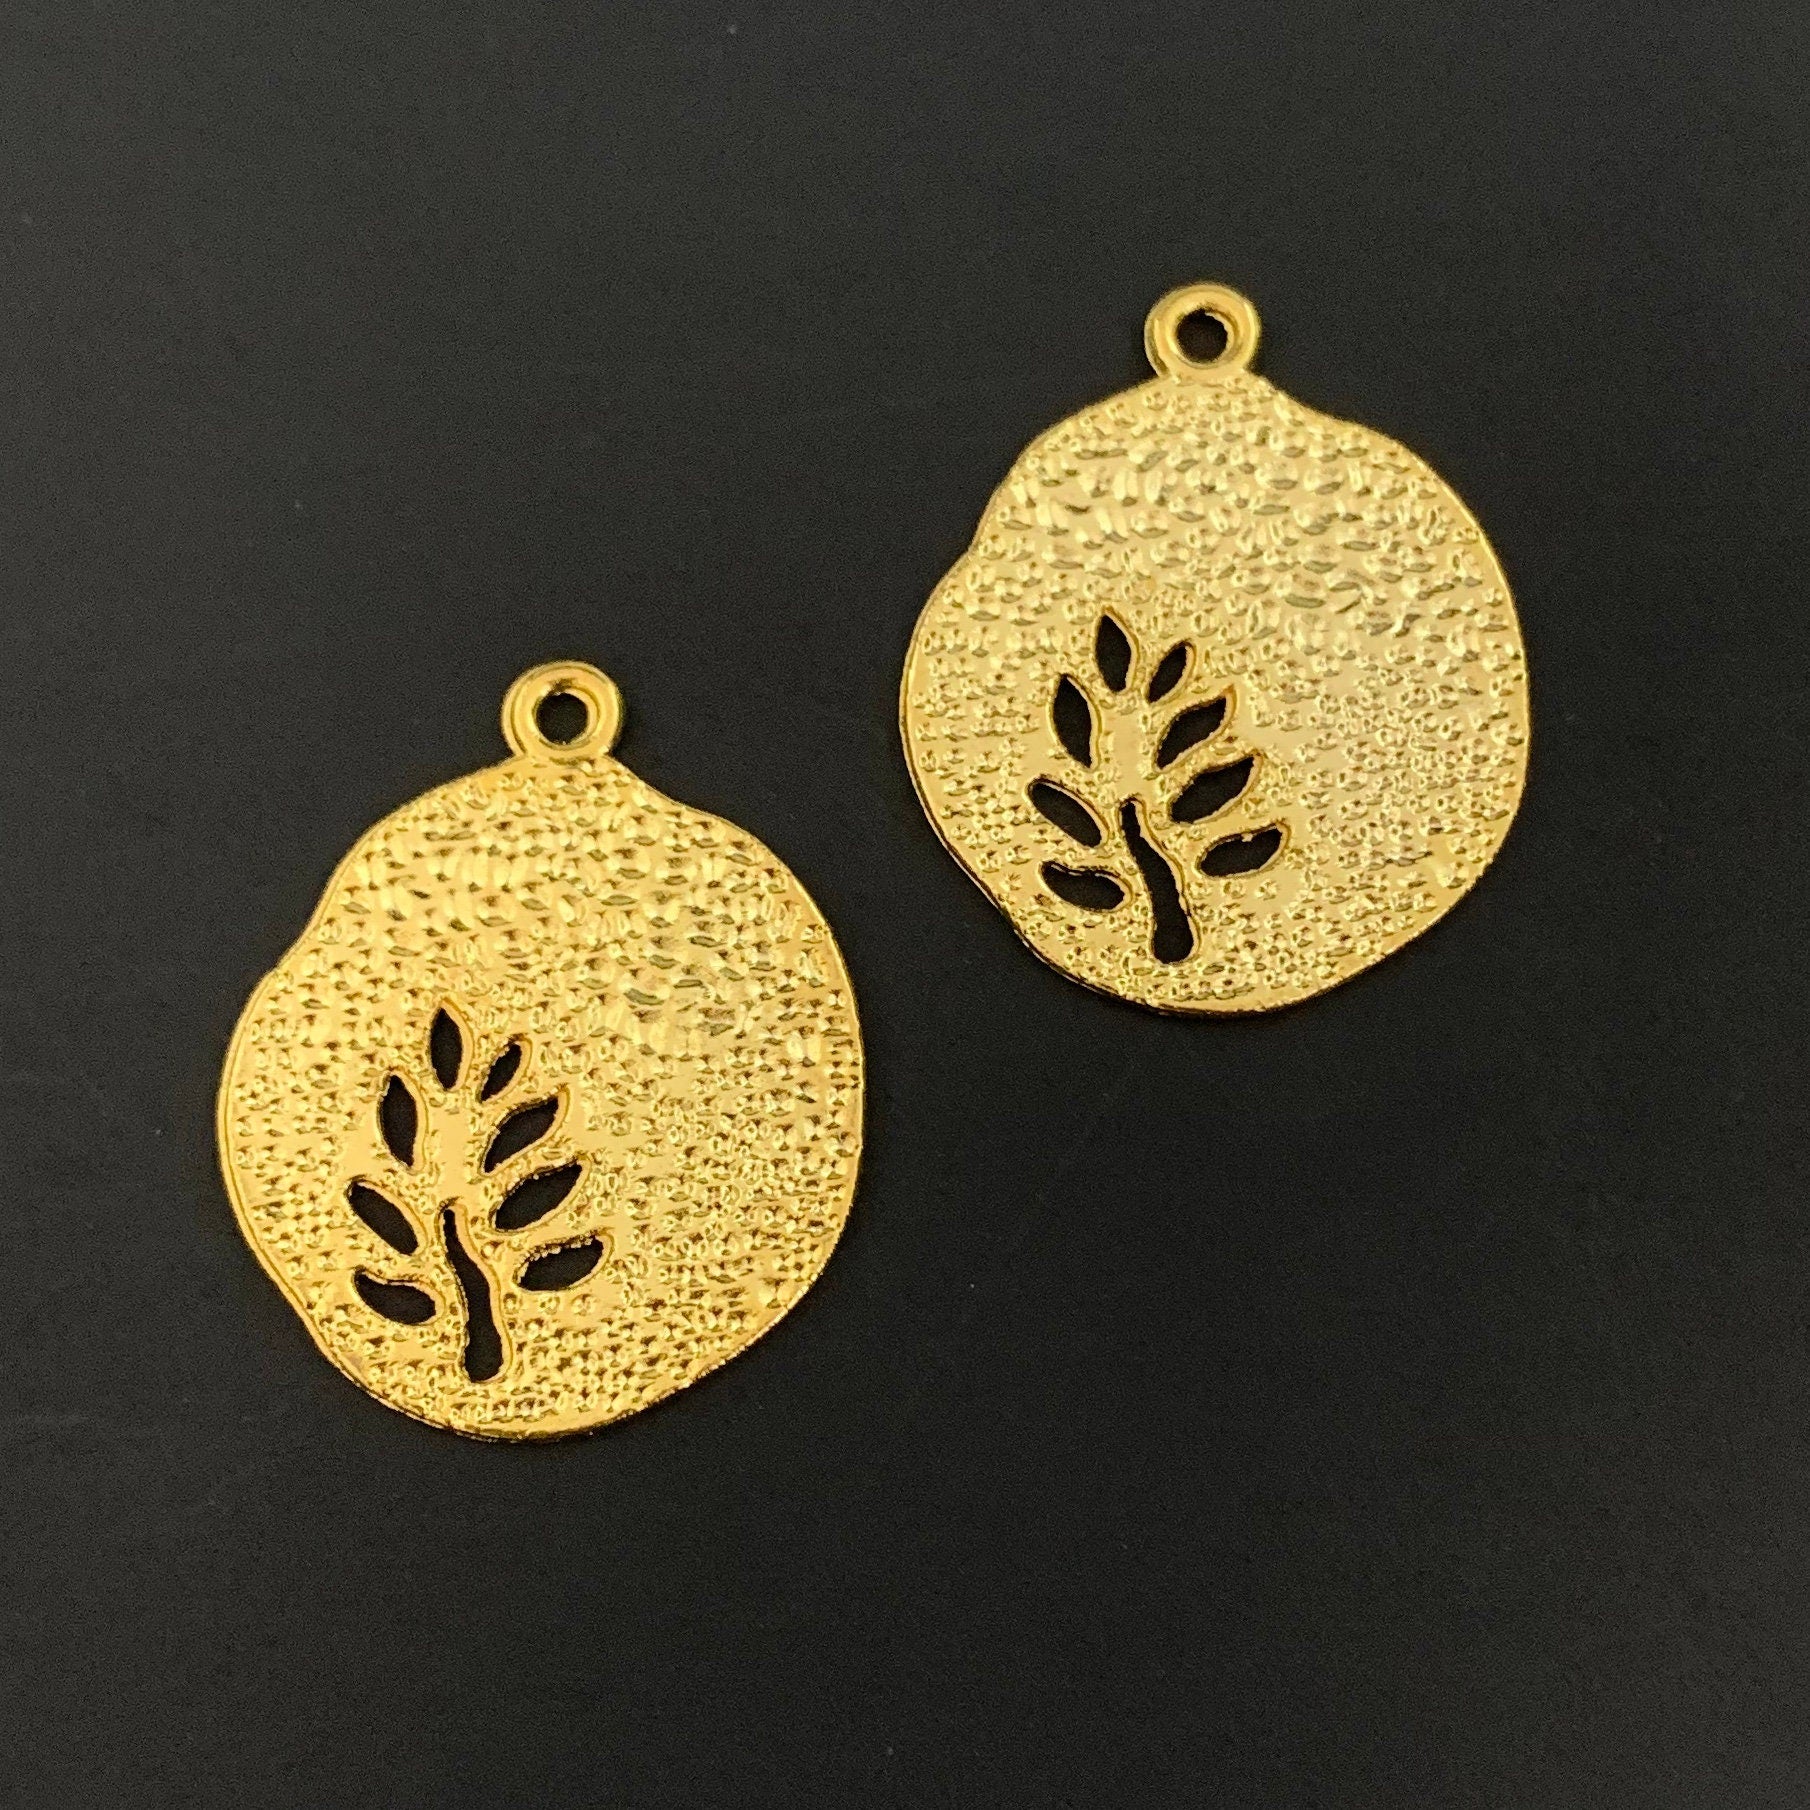 5 Leaf Disc Charms - Gold Finish